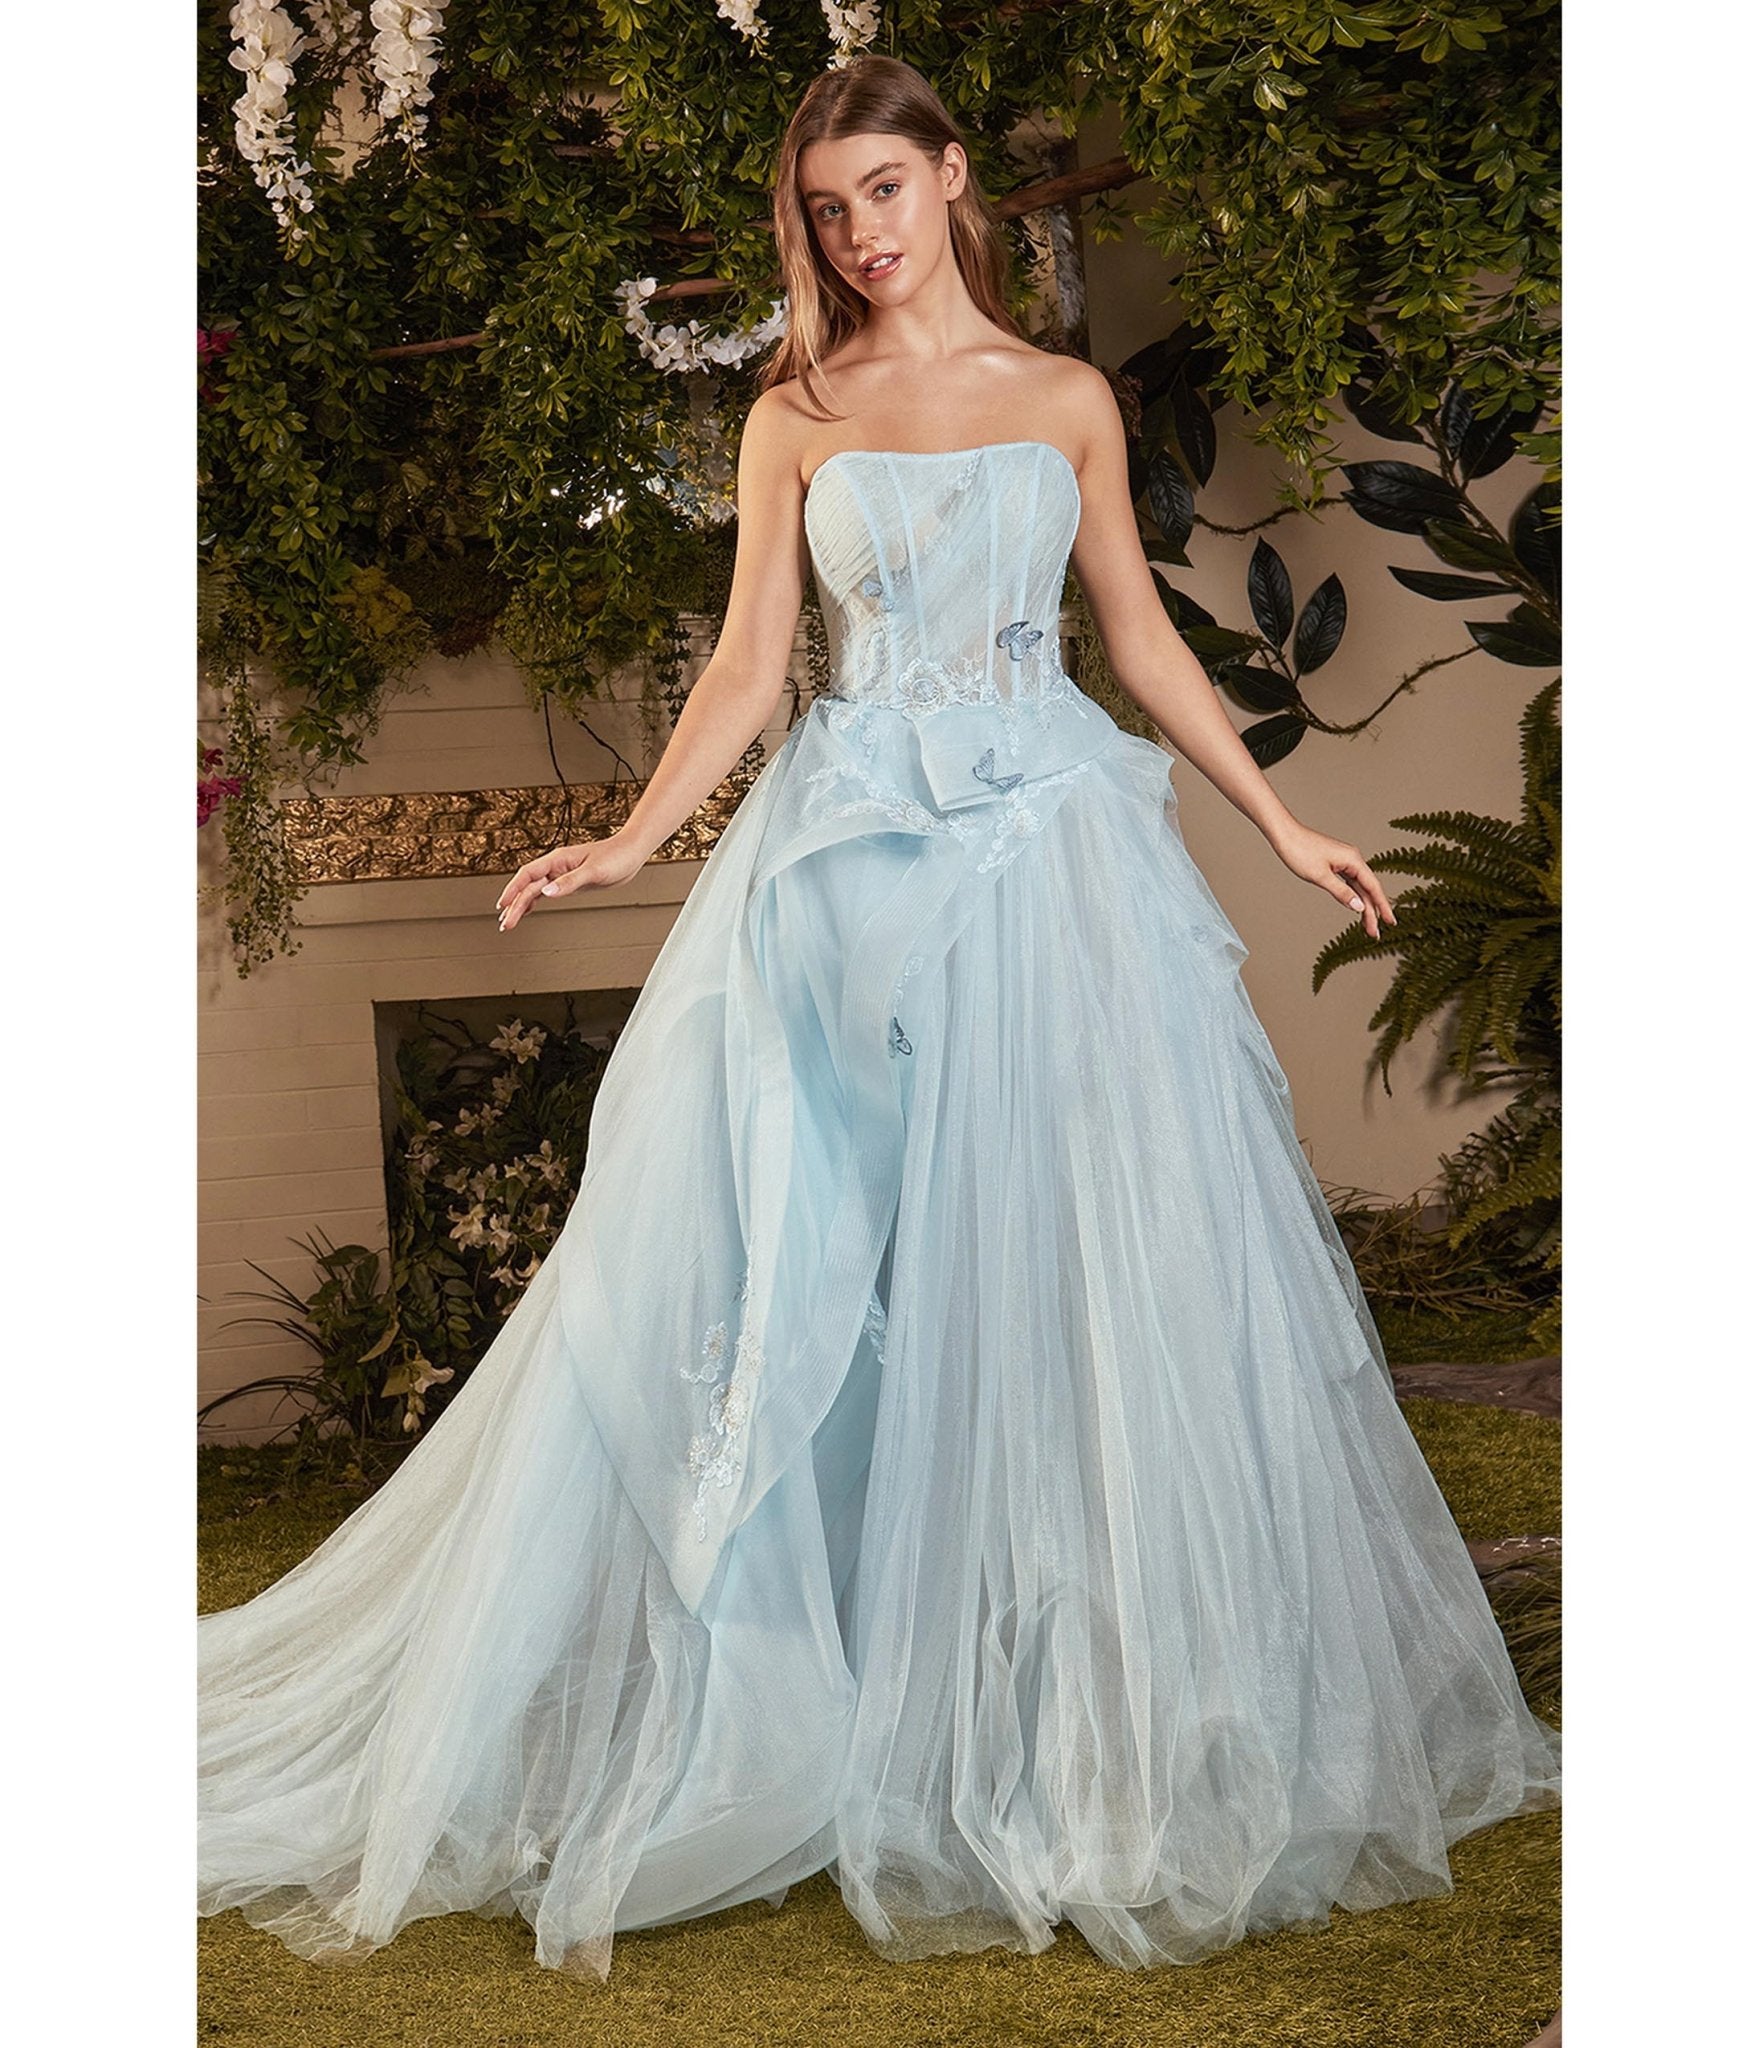 Beautiful tulle skirt dress with satin sheer bodice and butterfly